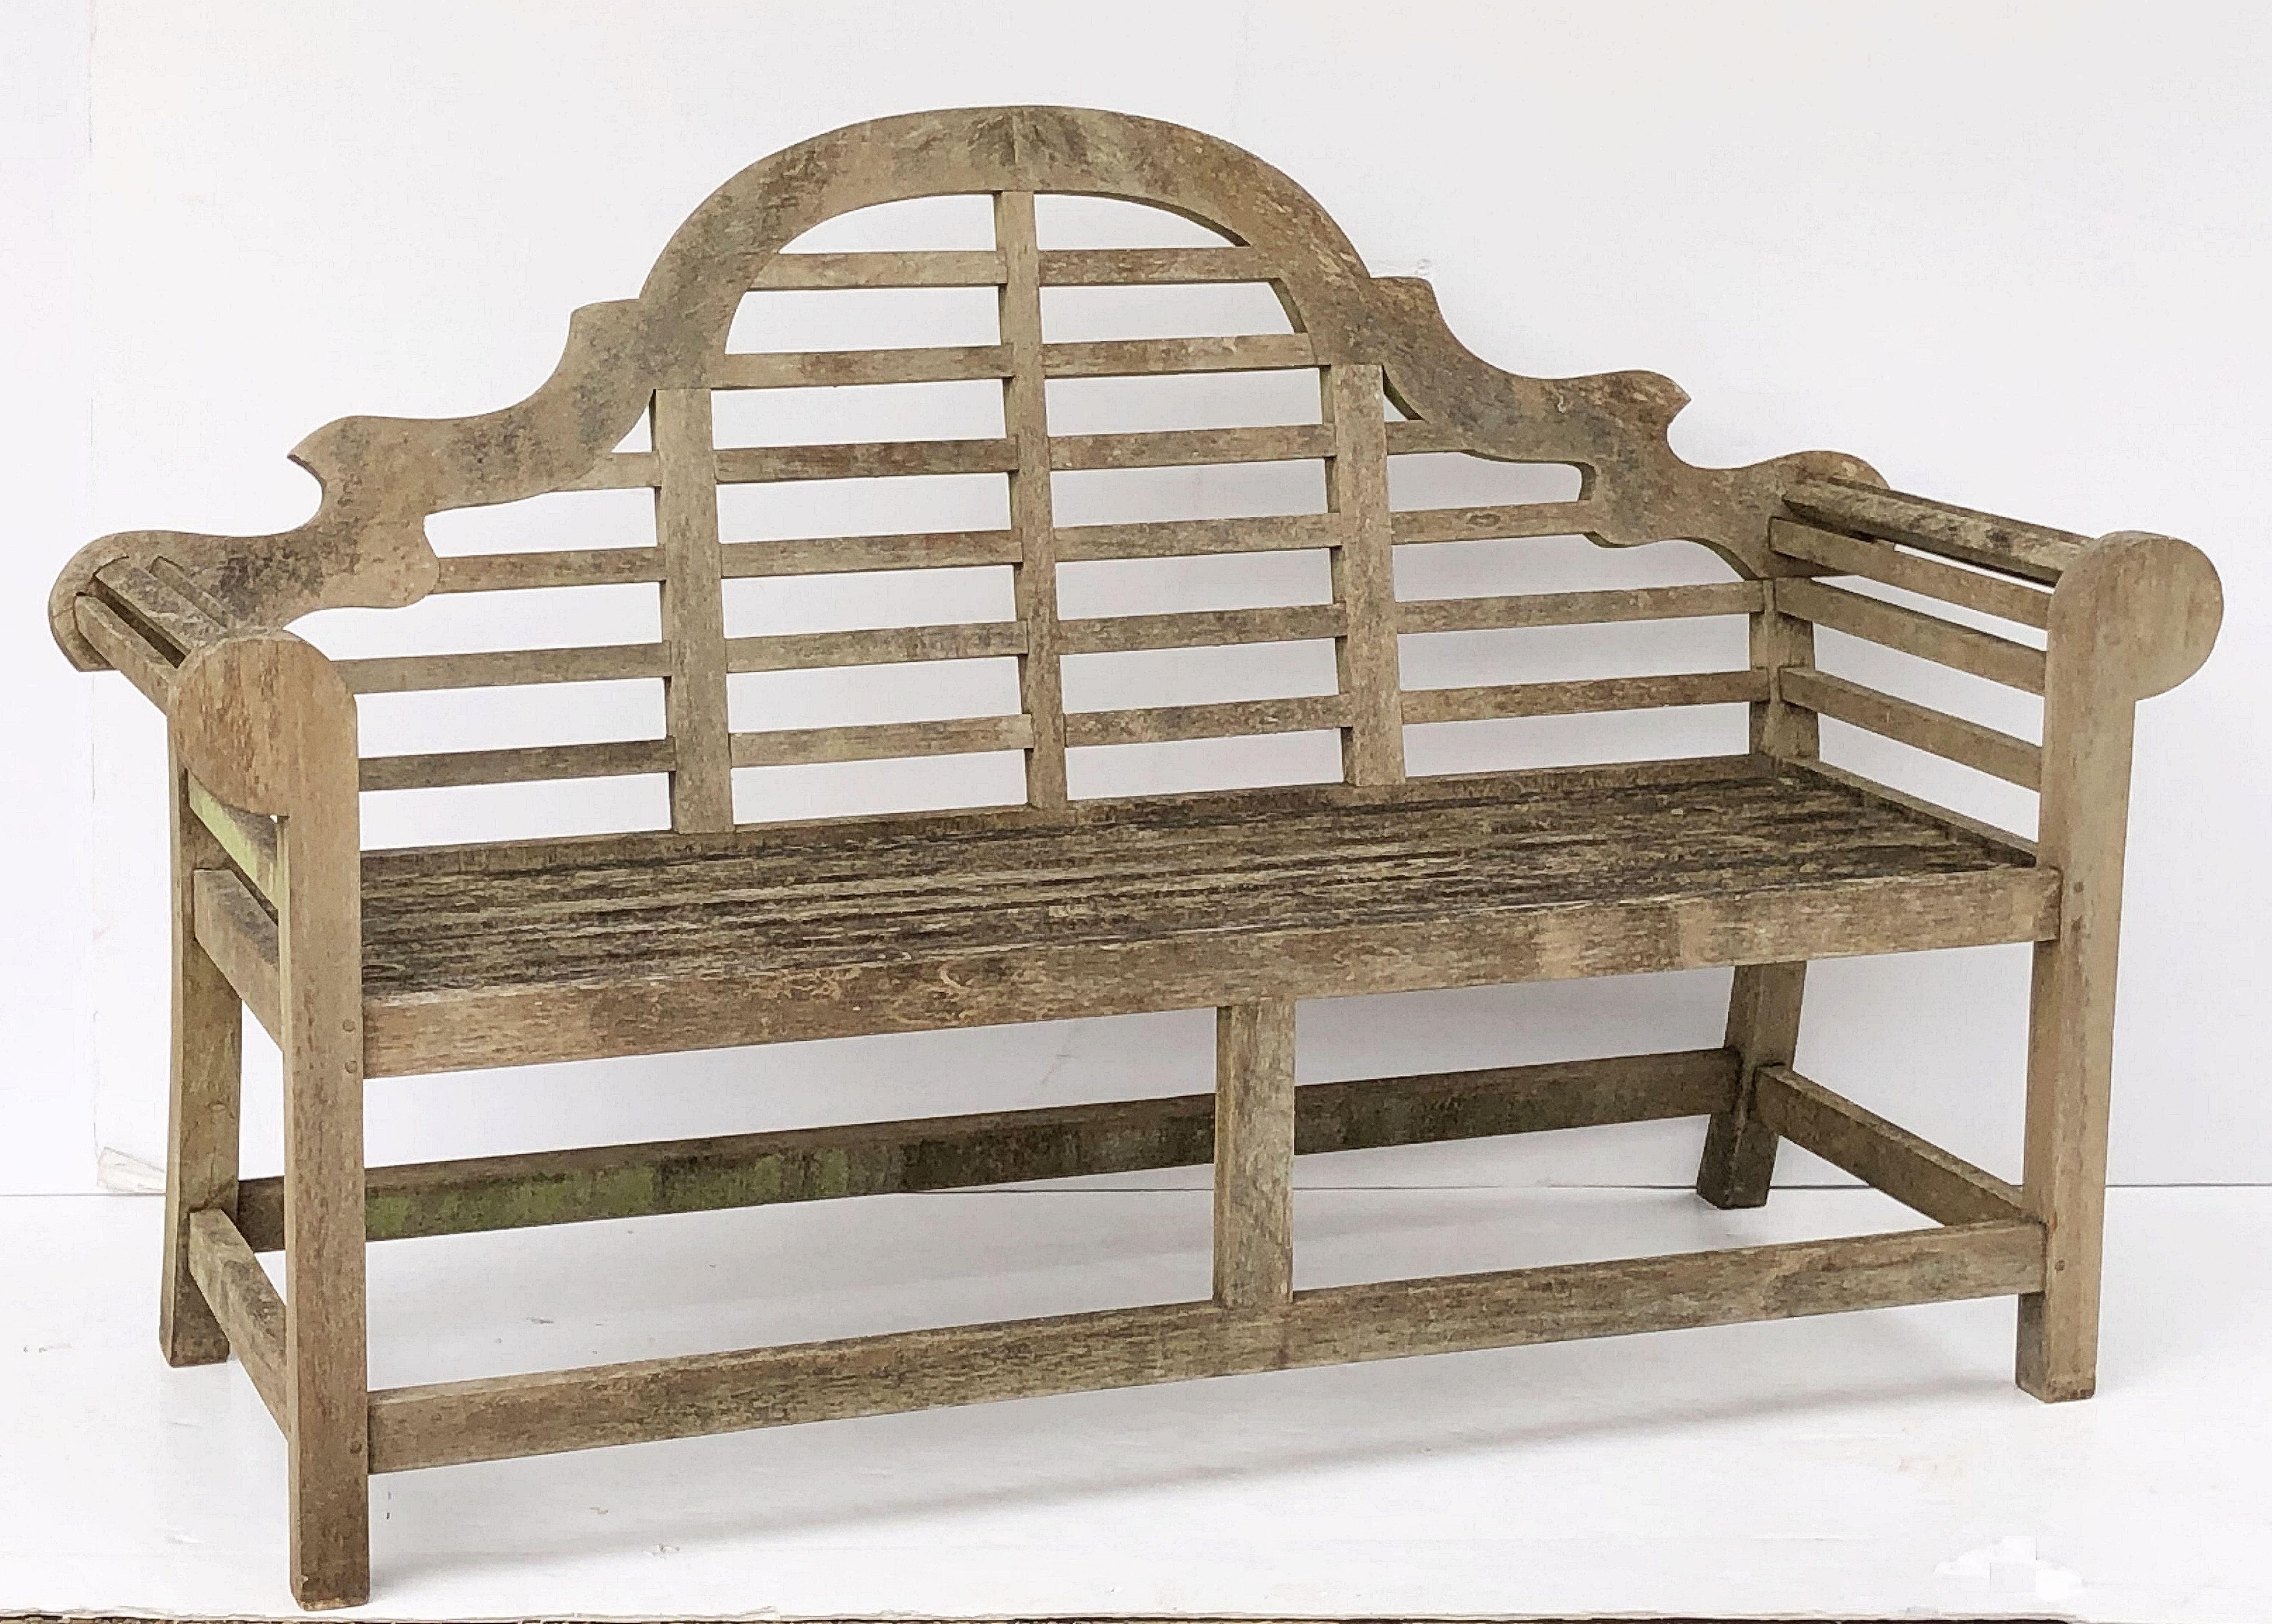 A fine vintage Lutyens style teak English garden bench after Sir Edwin Lutyens, the British architect renowned for his imaginative, Classic designs throughout England, Ireland and New Delhi (India).

Featuring a high-arched back for comfort and